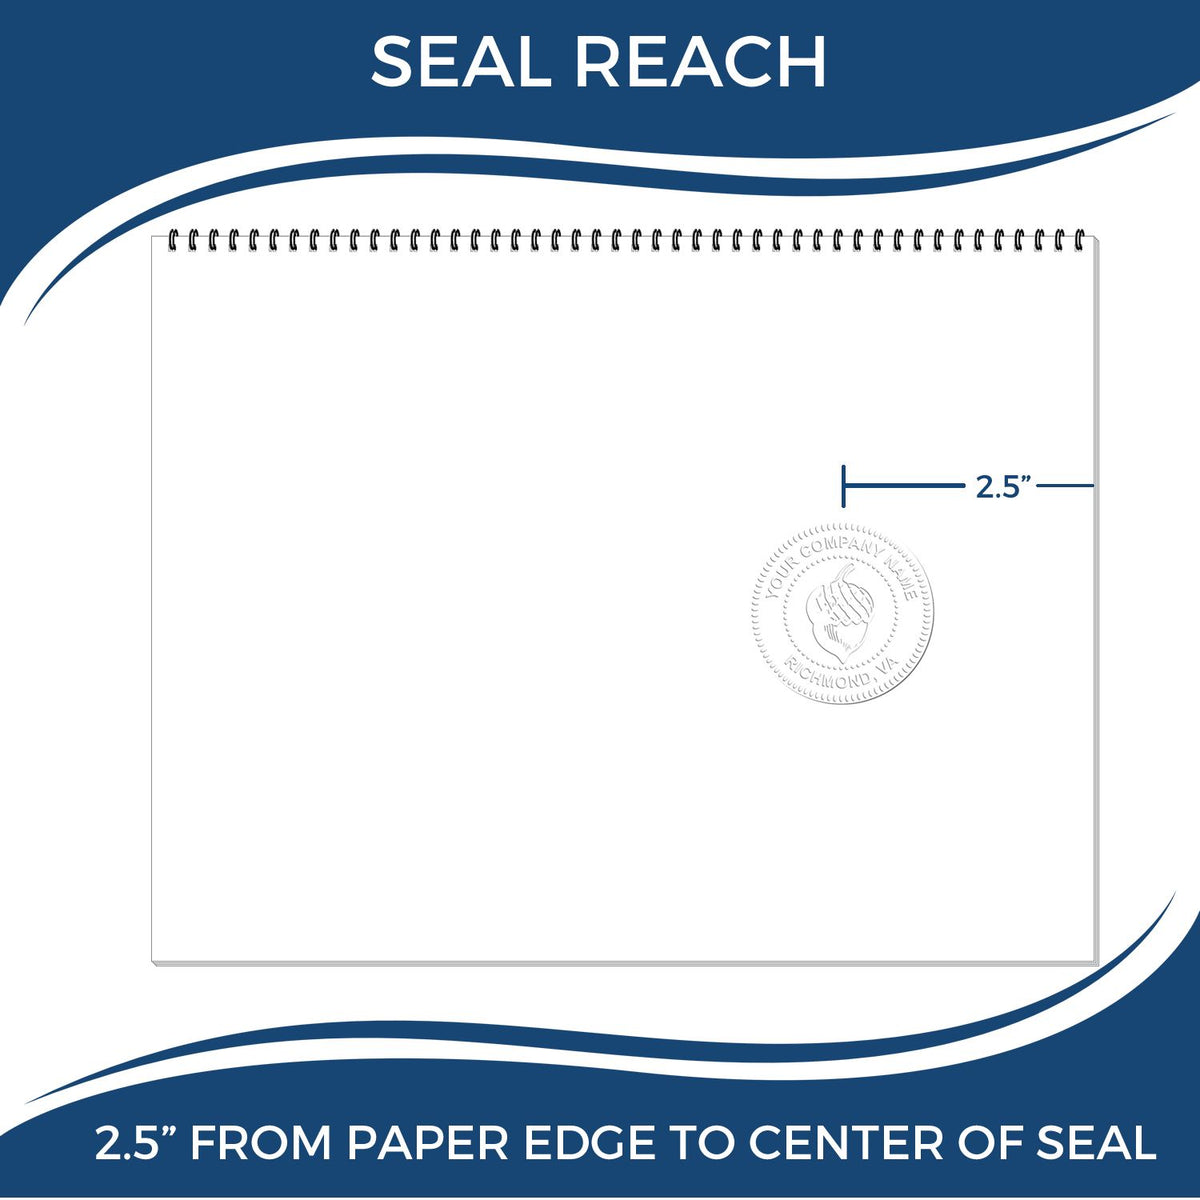 An infographic showing the seal reach which is represented by a ruler and a miniature seal image of the Heavy Duty Cast Iron Montana Land Surveyor Seal Embosser